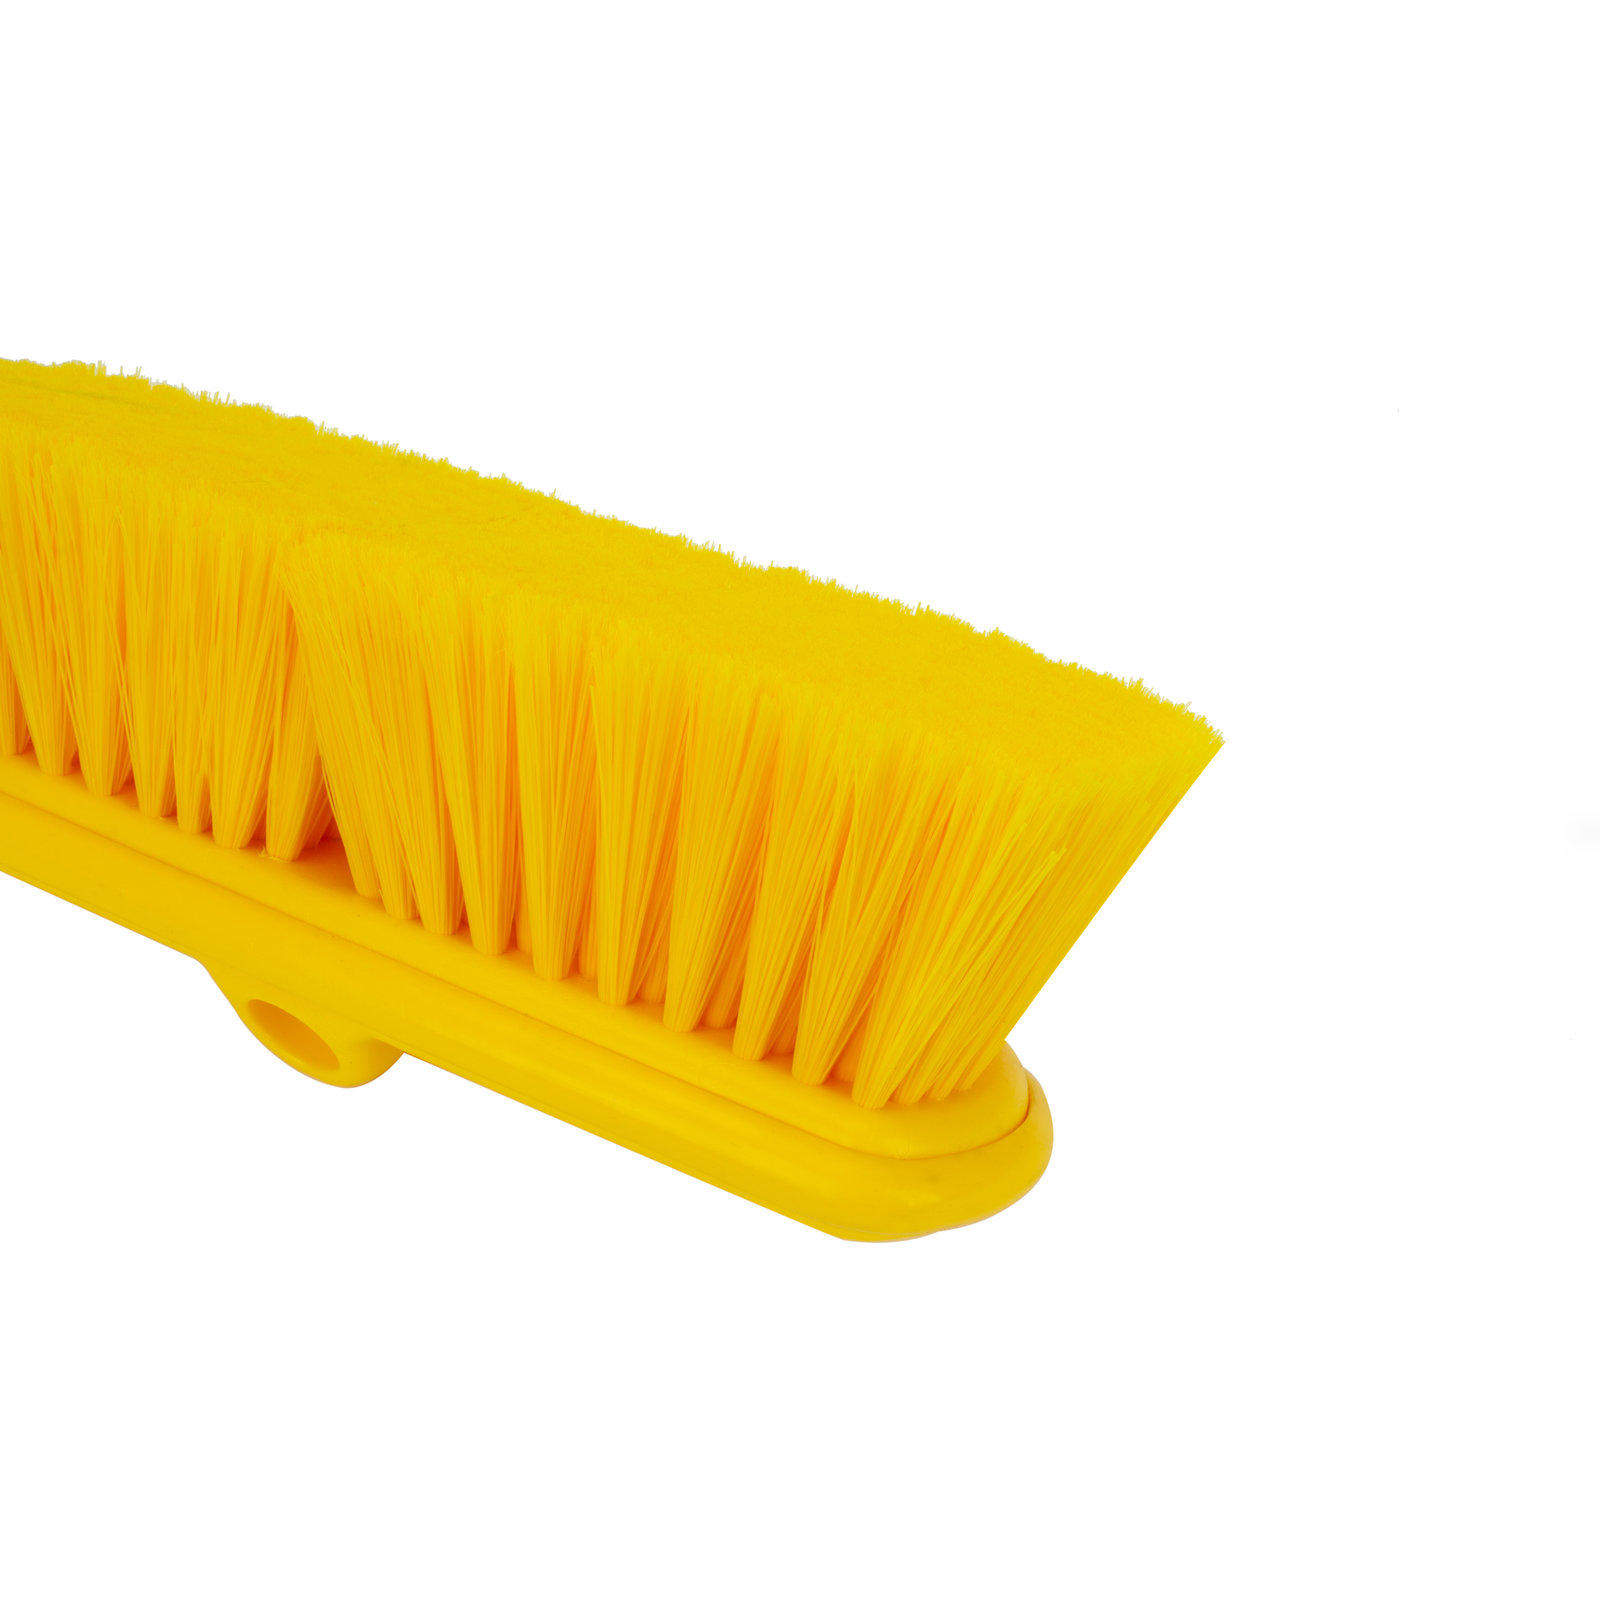 40050EC04 - Color Coded Flo-Thru Brush with Protective Bumper 9.5 - Yellow